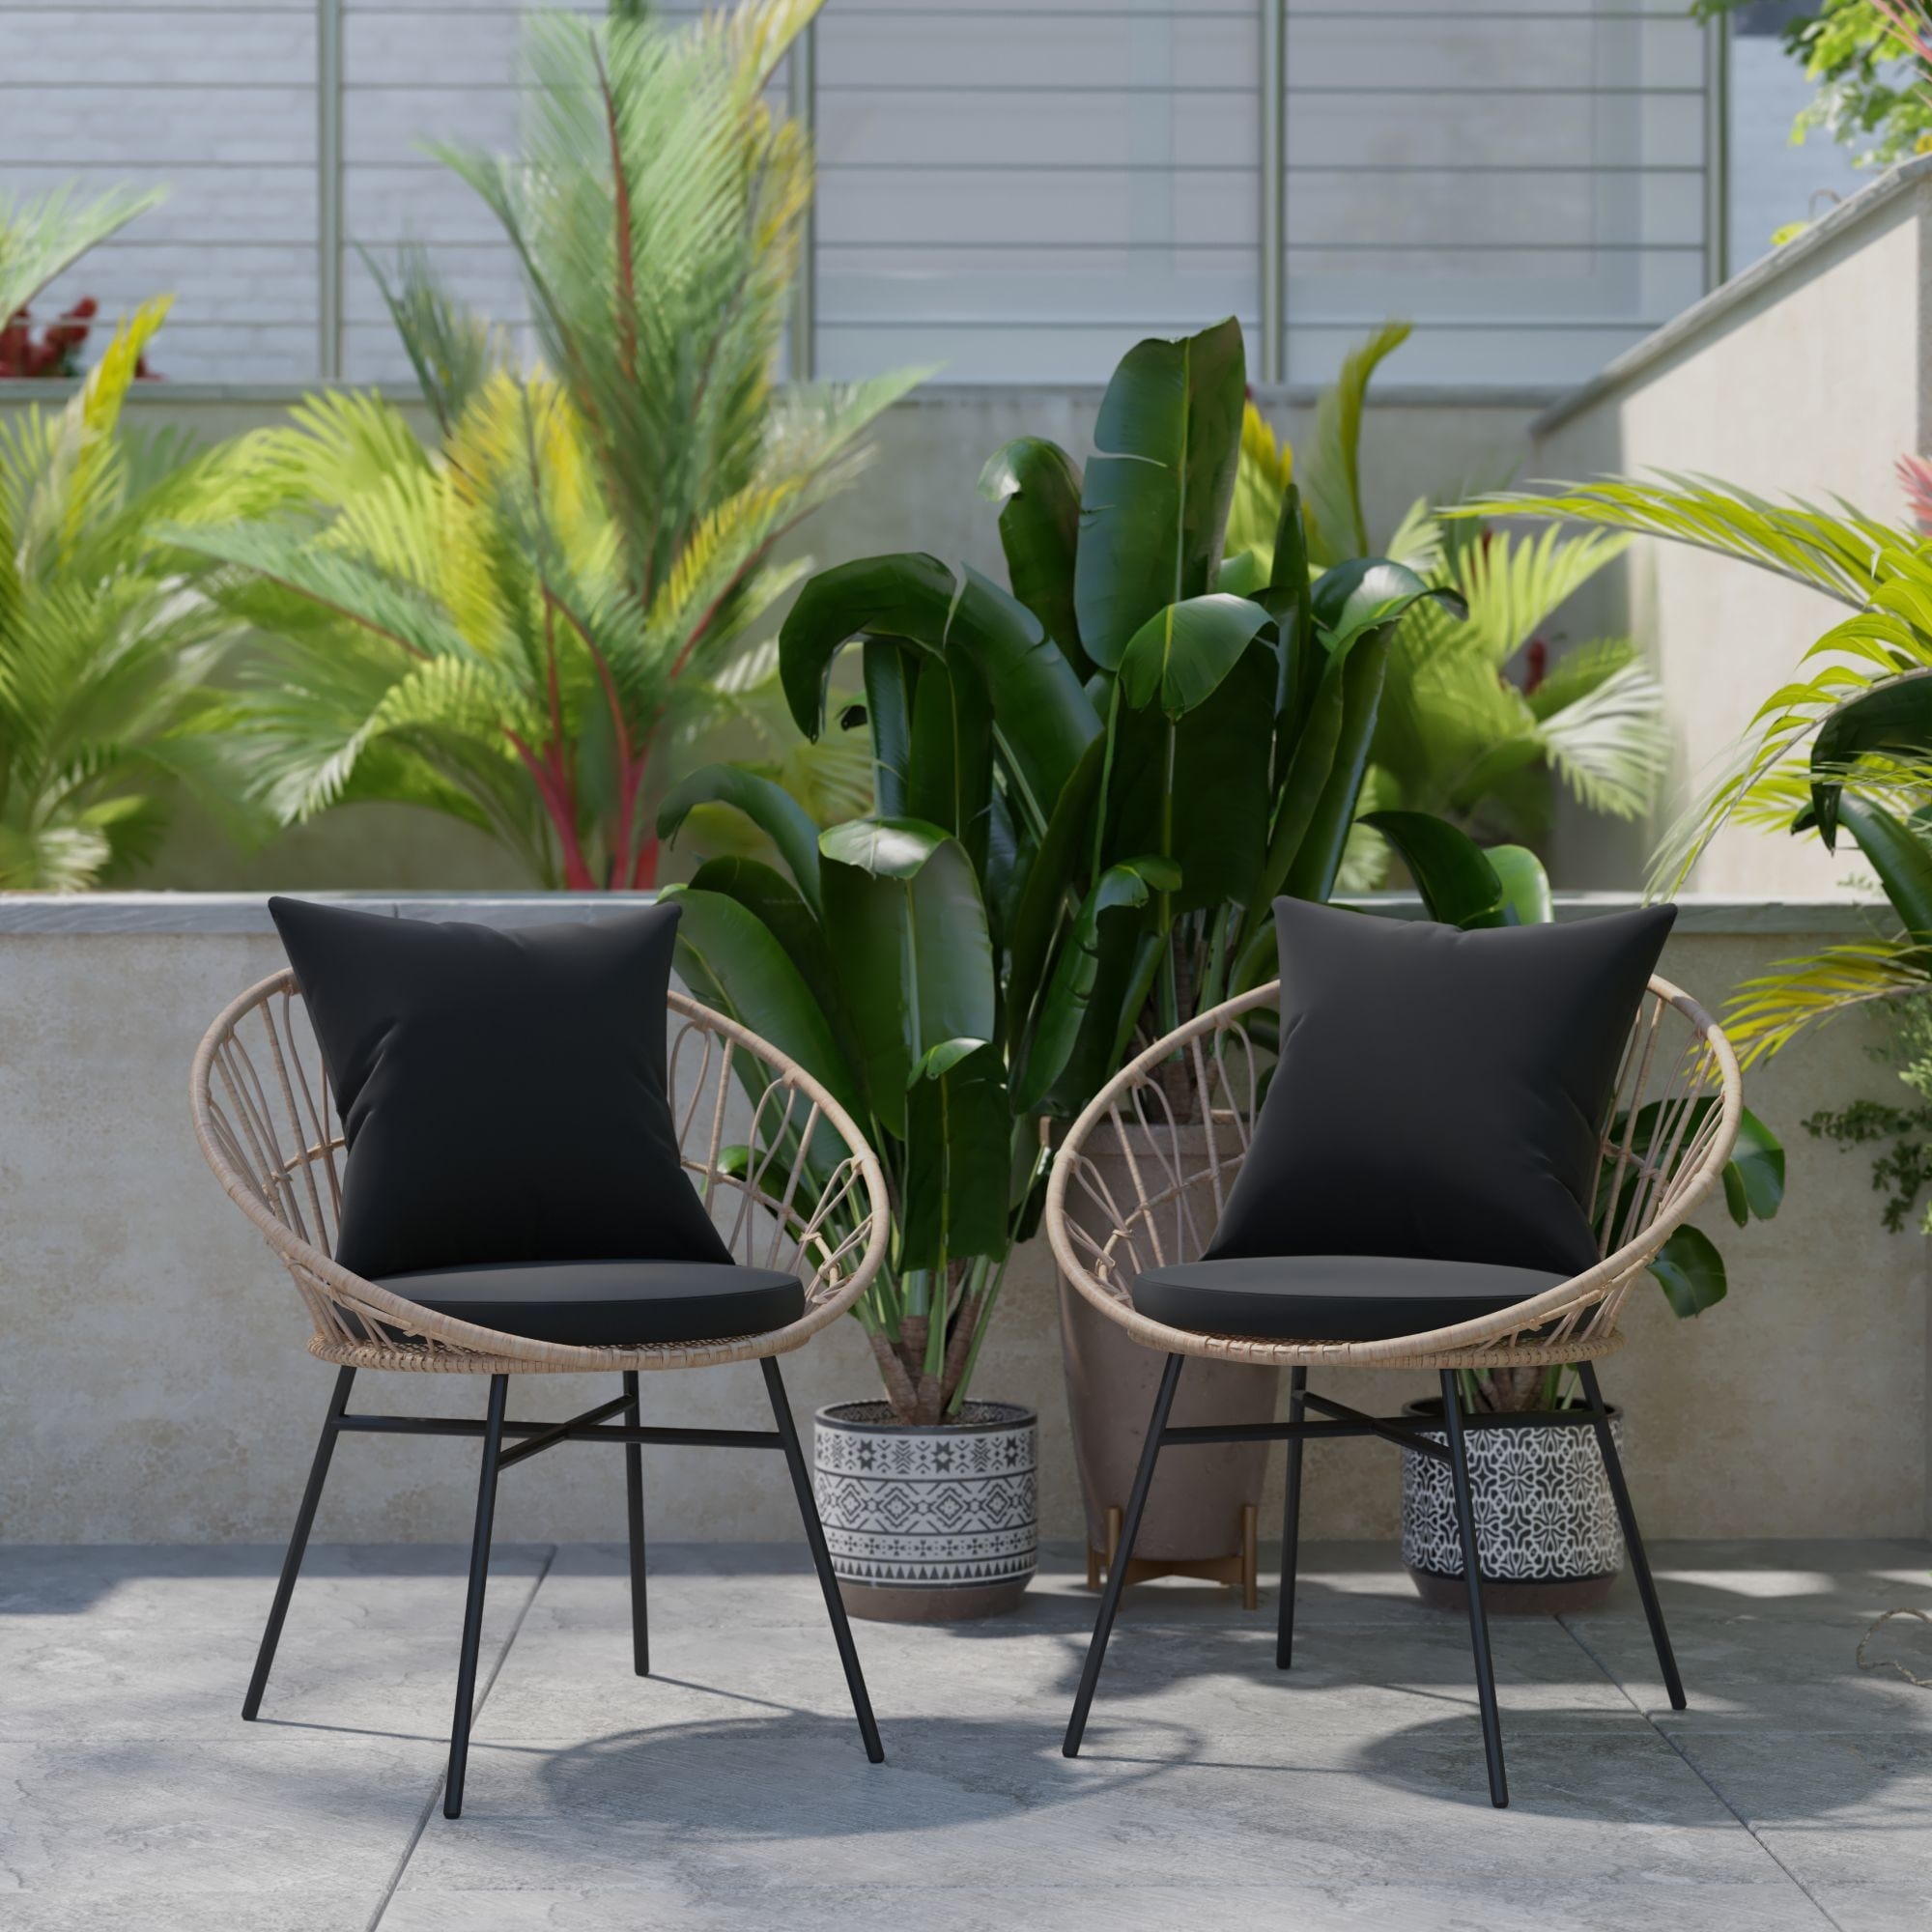 https://ak1.ostkcdn.com/images/products/is/images/direct/b8f27a69cacf859c084728fec1d8209ef6469af6/Indoor-Outdoor-Boho-Rattan-Rope-Chairs-with-Back-%26-Seat-Cushions.jpg